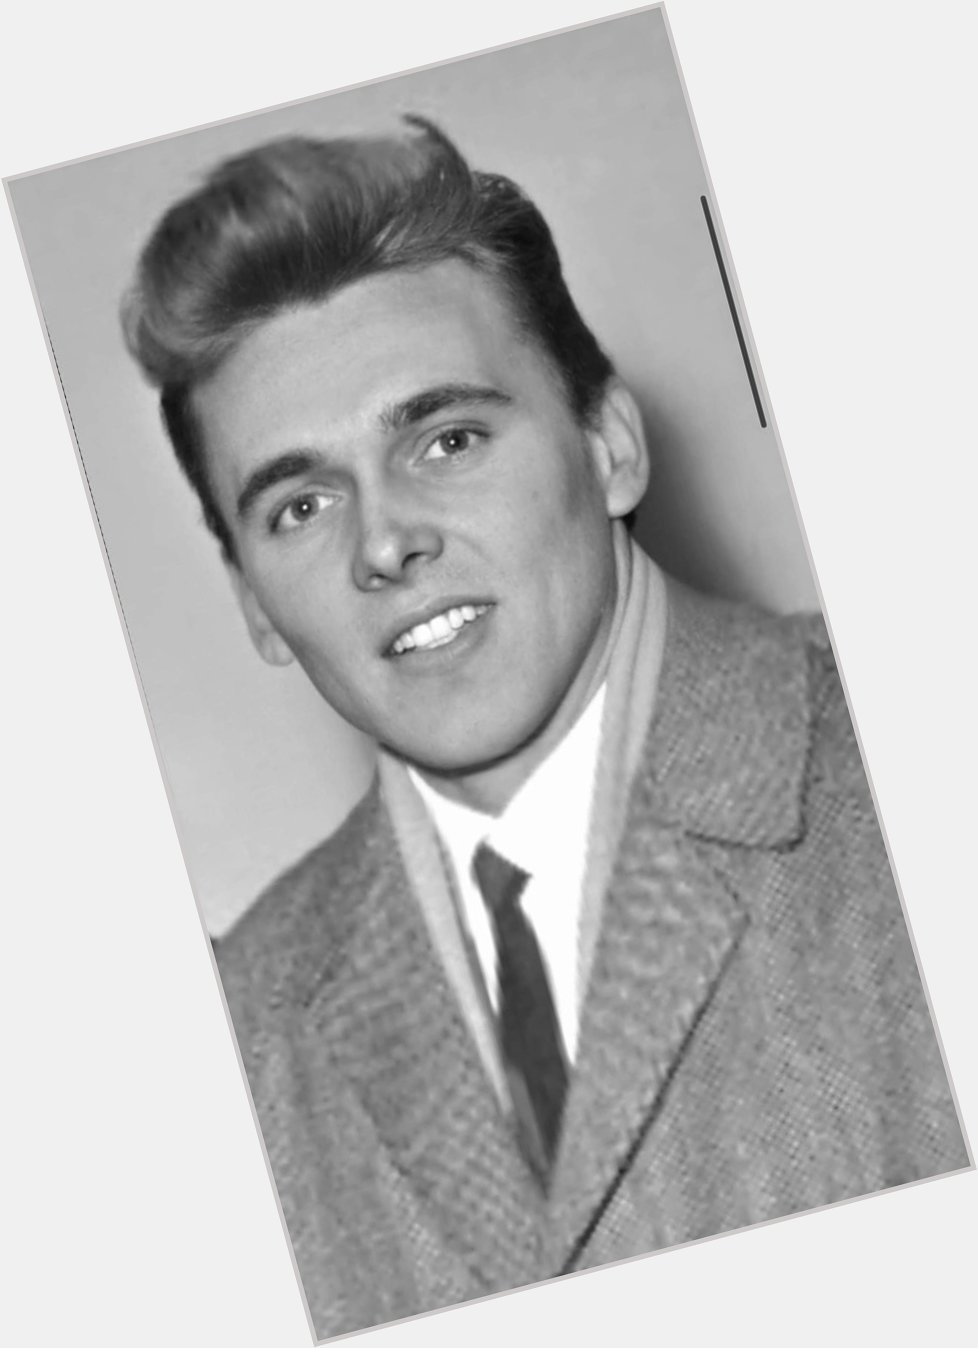 Remembering the lovely Billy Fury on what would have been his 80th birthday. Happy heavenly birthday Billy. 